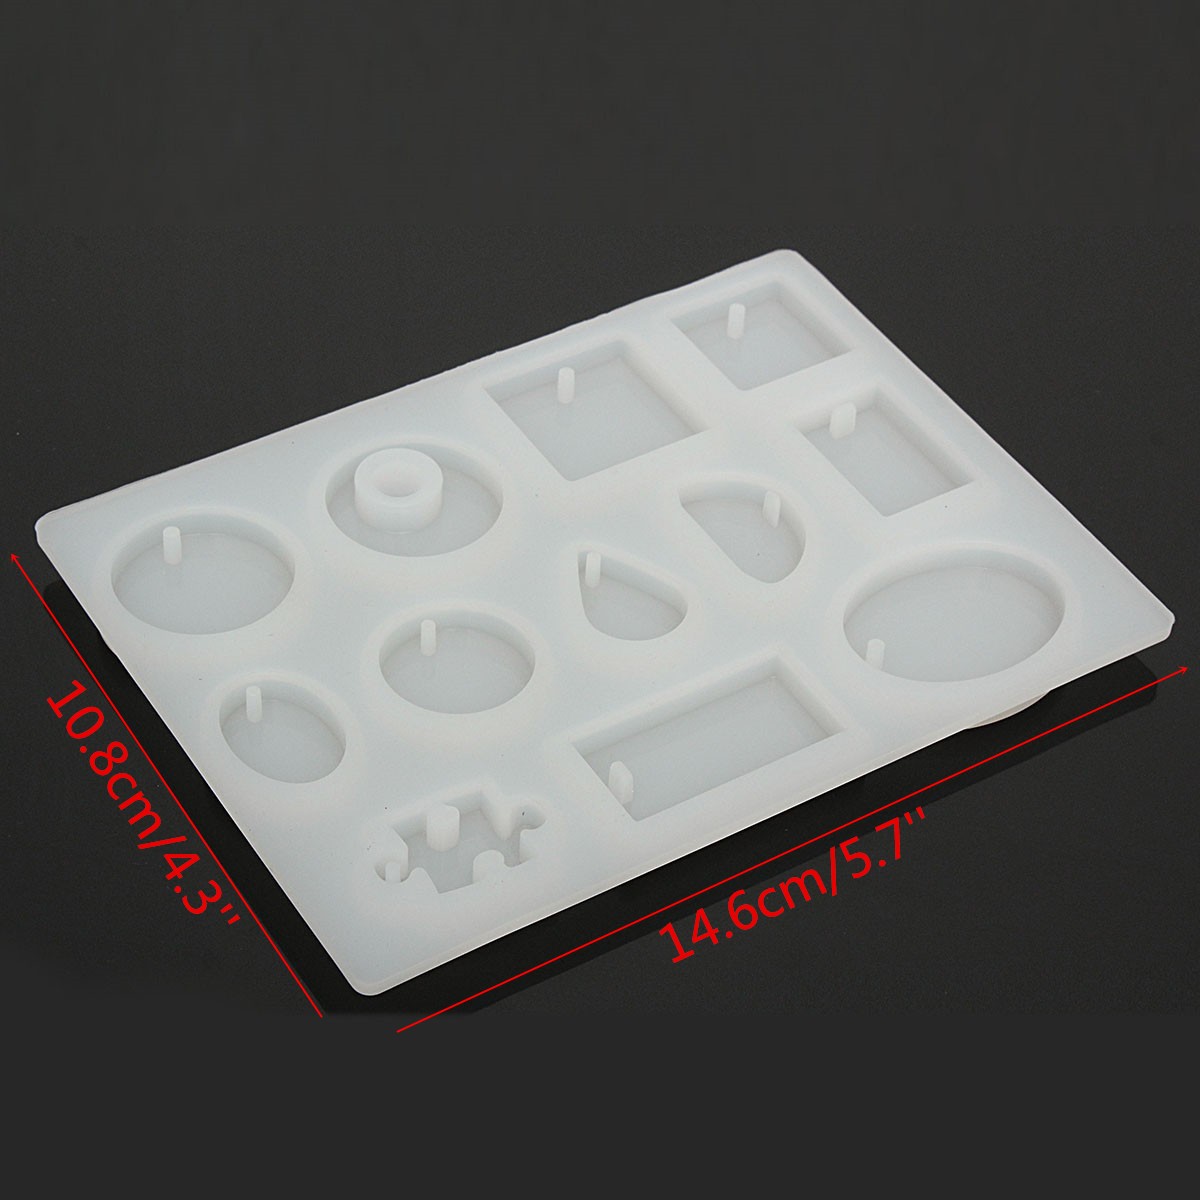 12-Models-Silicone-Mold-Mould-Resin-DIY-Pendant-Jewelry-Tools-Accessories-1080964